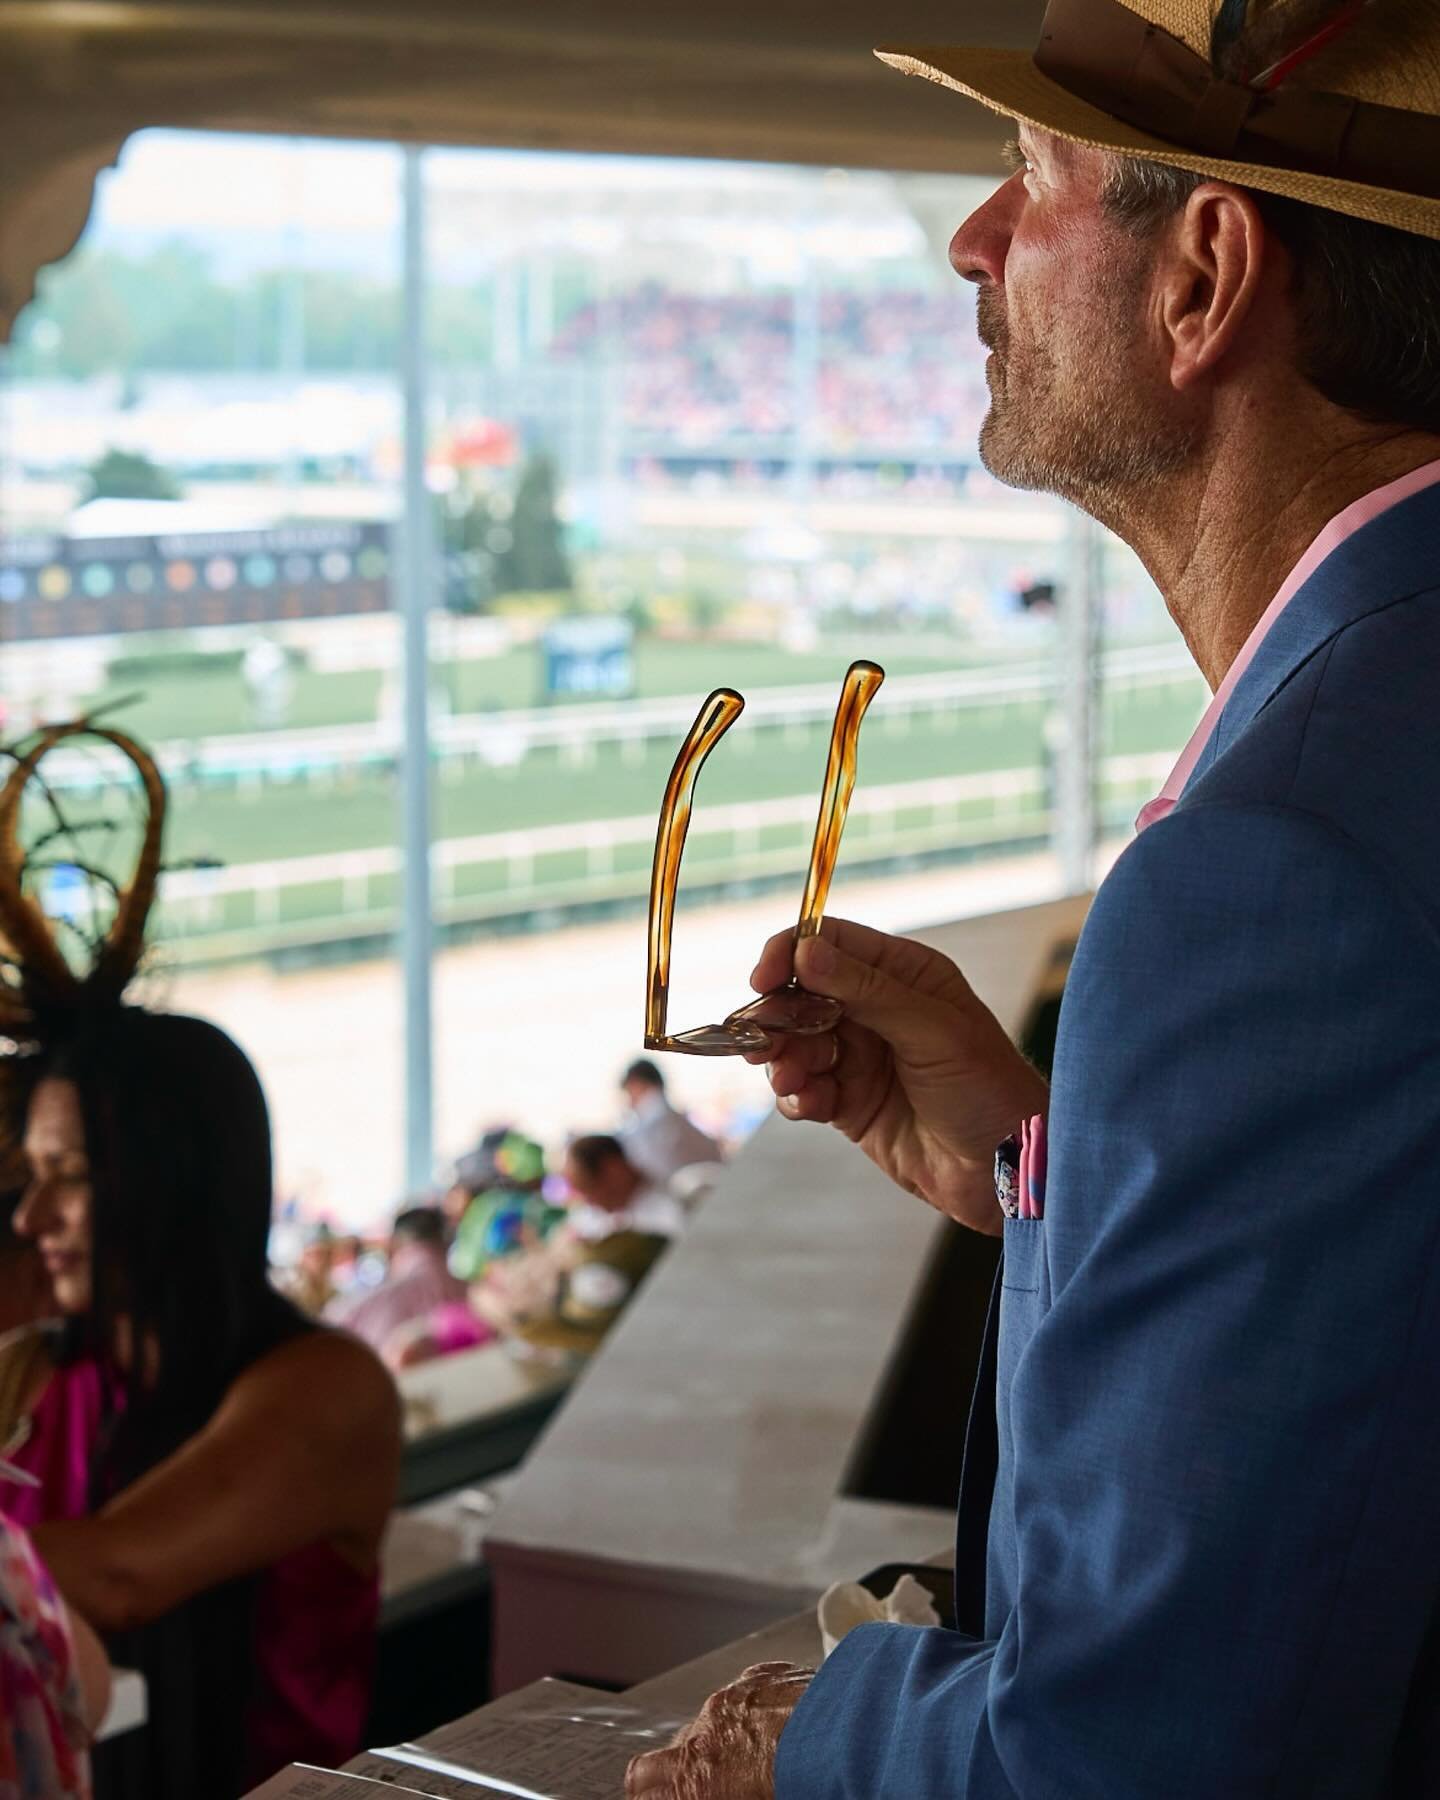 I hope your bets were lucky and your mint juleps strong. Only 360 days until the next most exciting two minutes in sports!

#kentuckyoaks #kentuckyderby #kyderby150